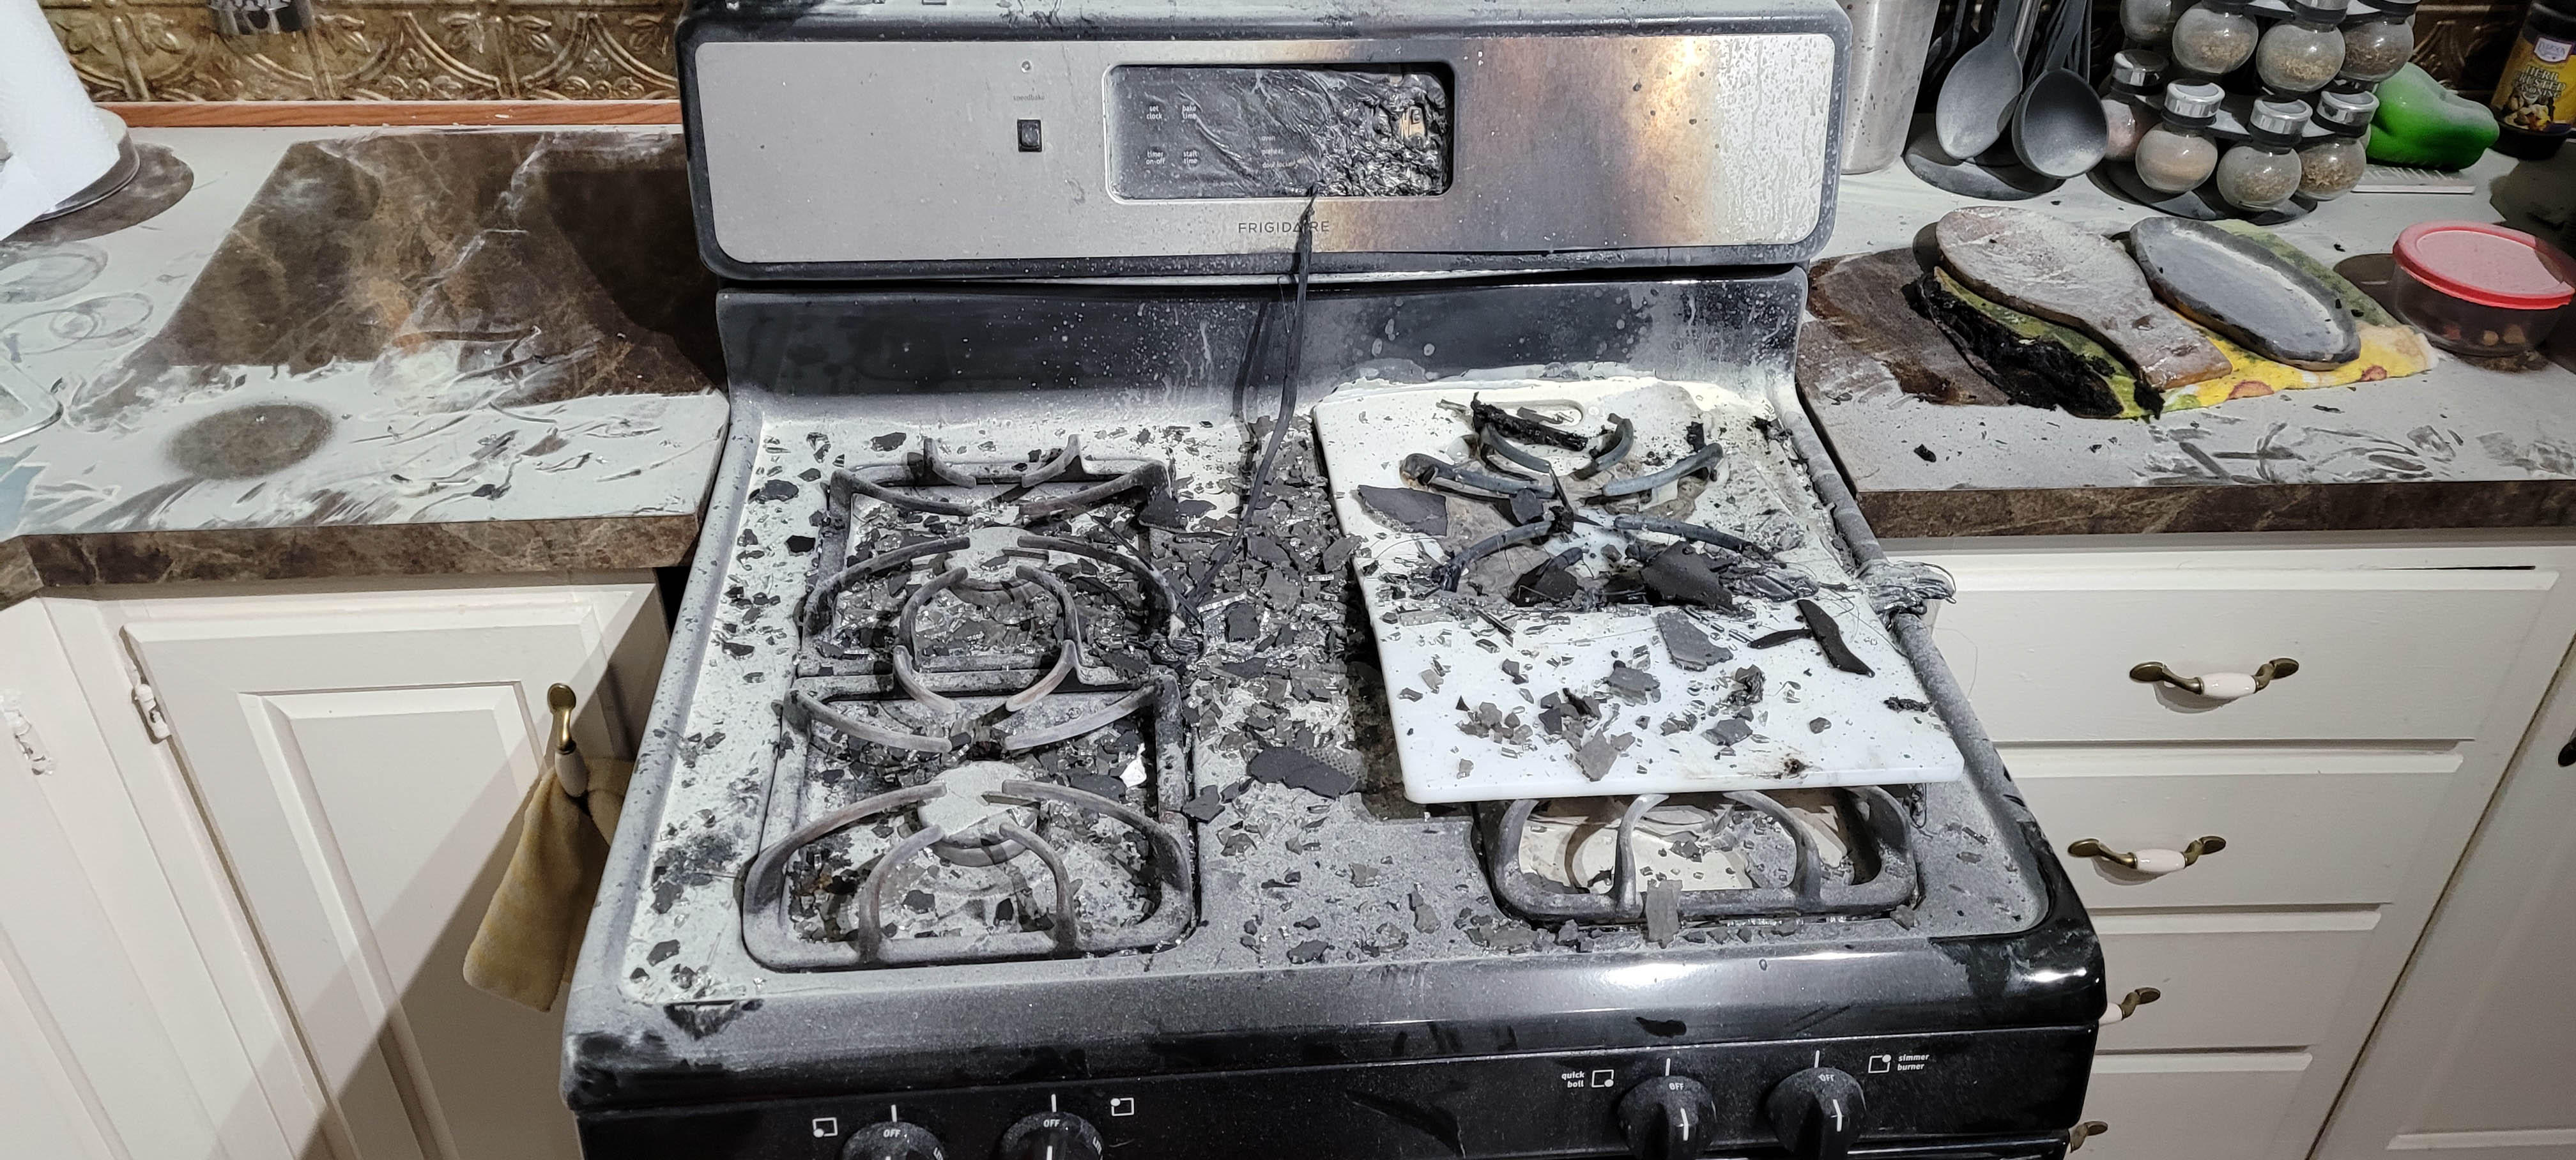 Allow SERVPRO of San Diego East to take care of the stress of fire damage. For fire restoration and cleanup in the Santee, CA area, we are the finest option. Please give us a call.